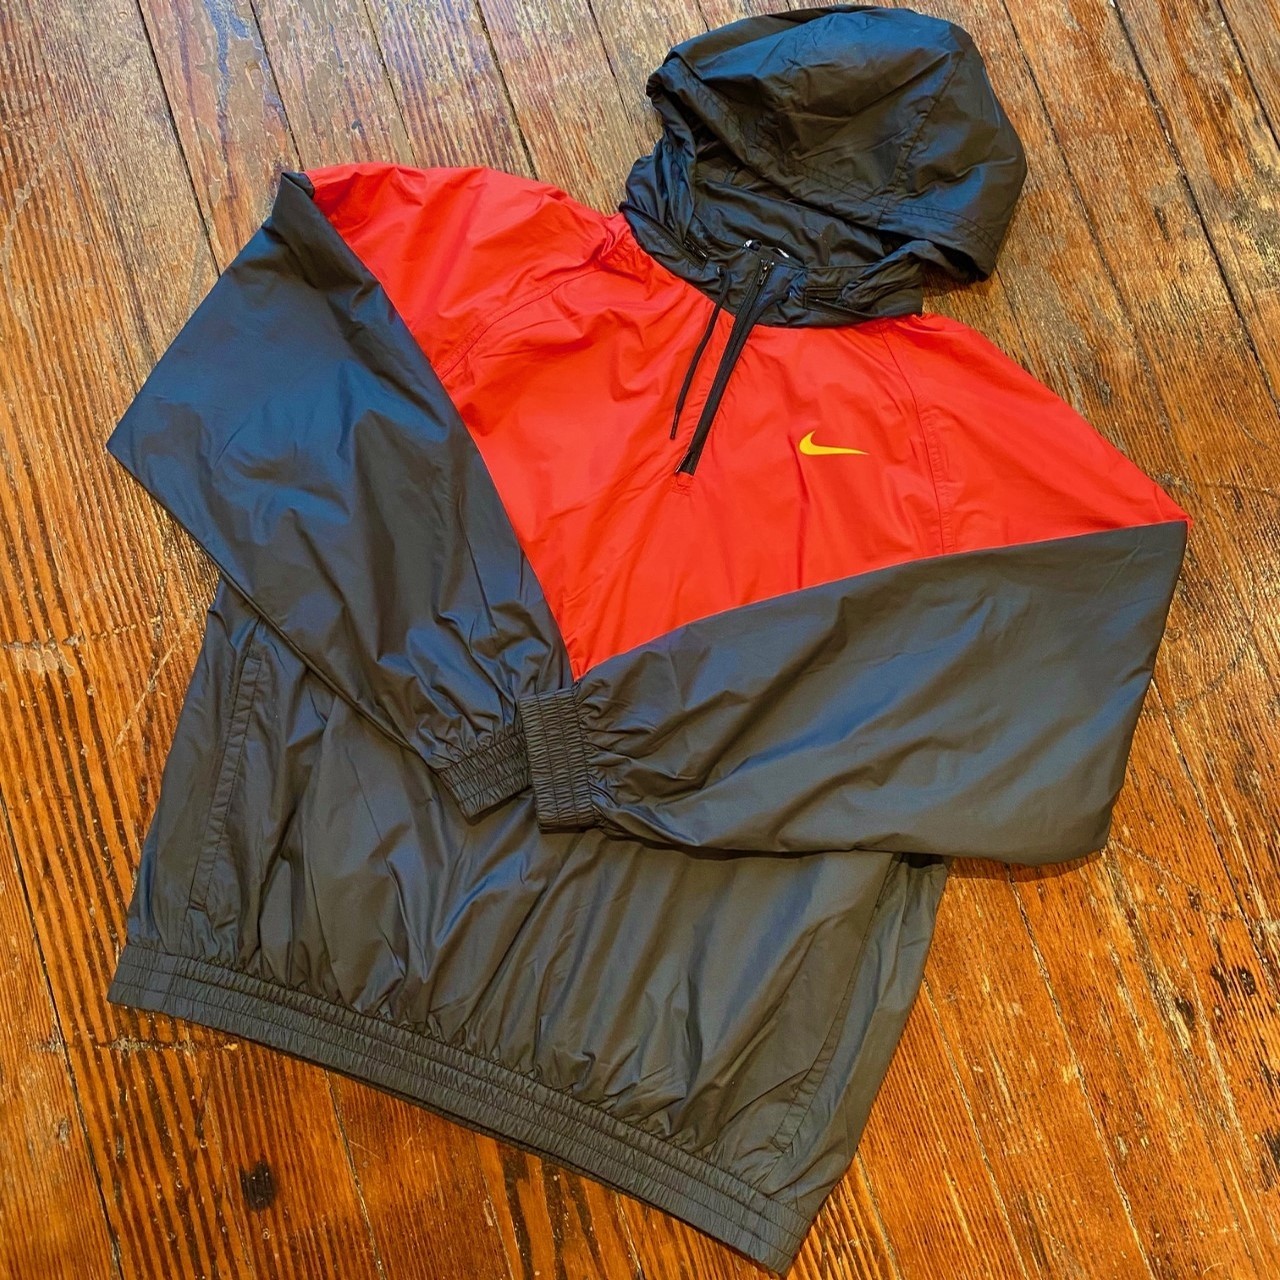 red and gold nike jacket